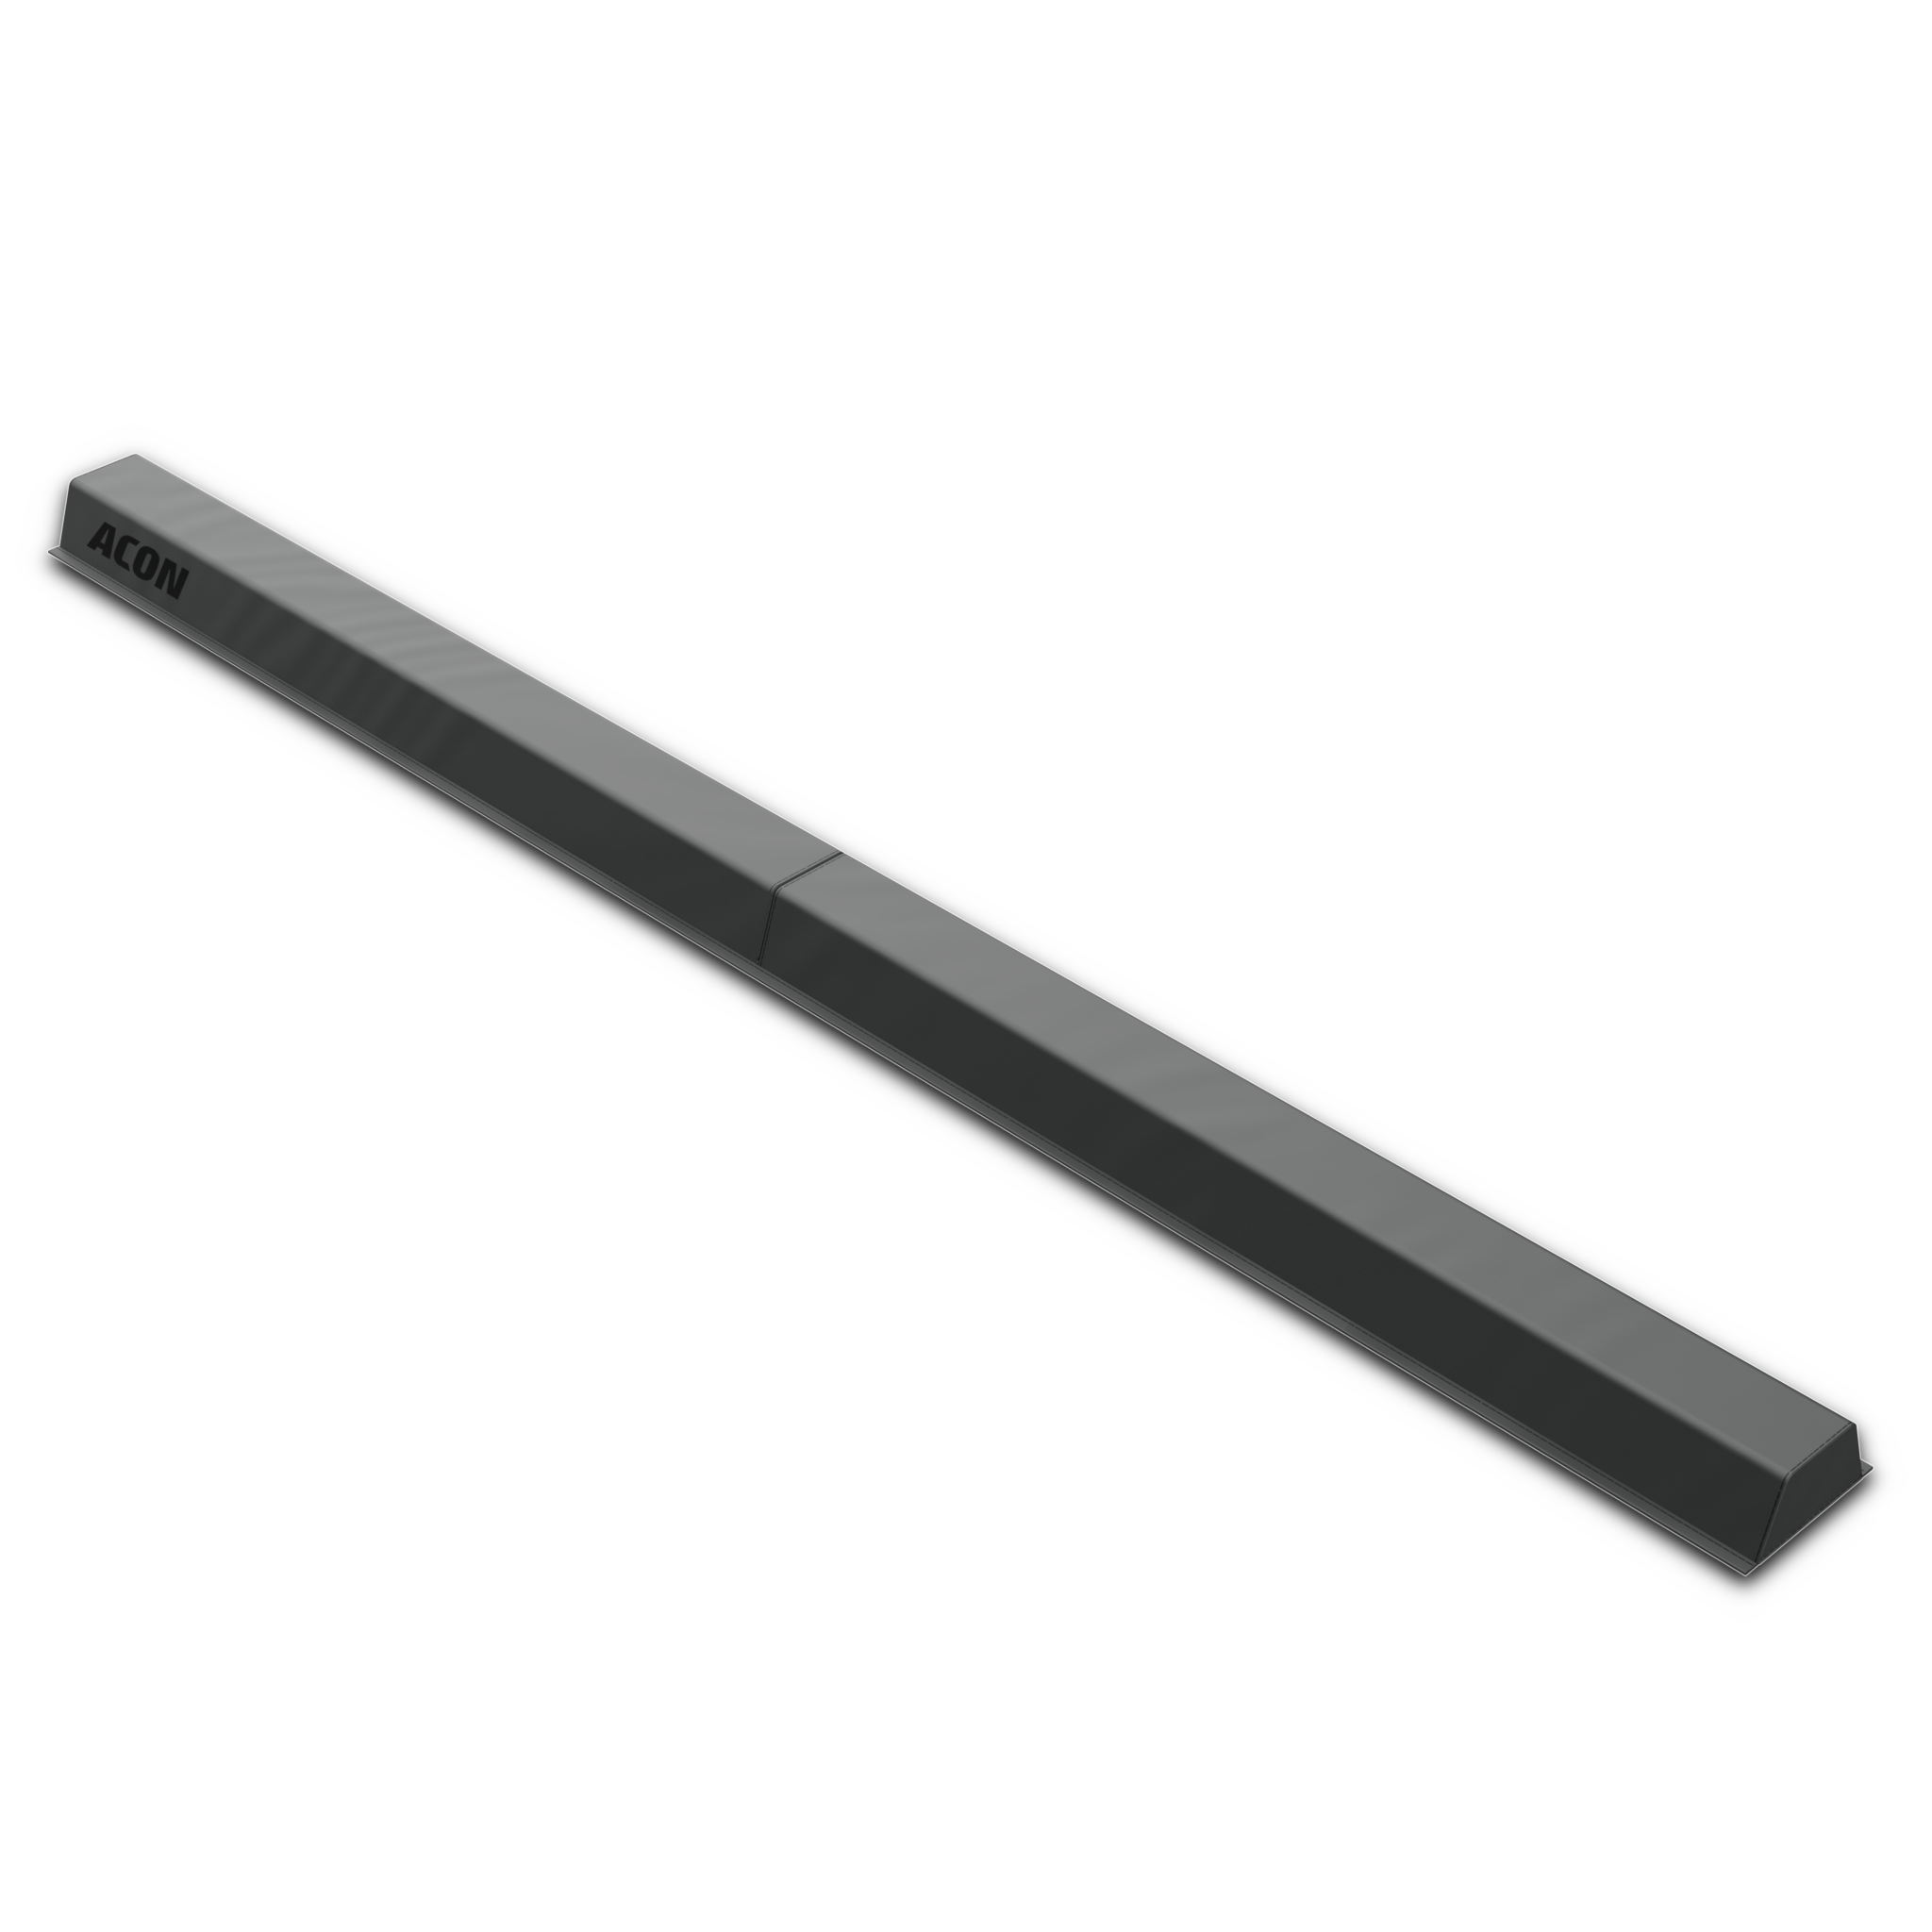 Product image of Acon Balance Beam Black Edition against a white background.